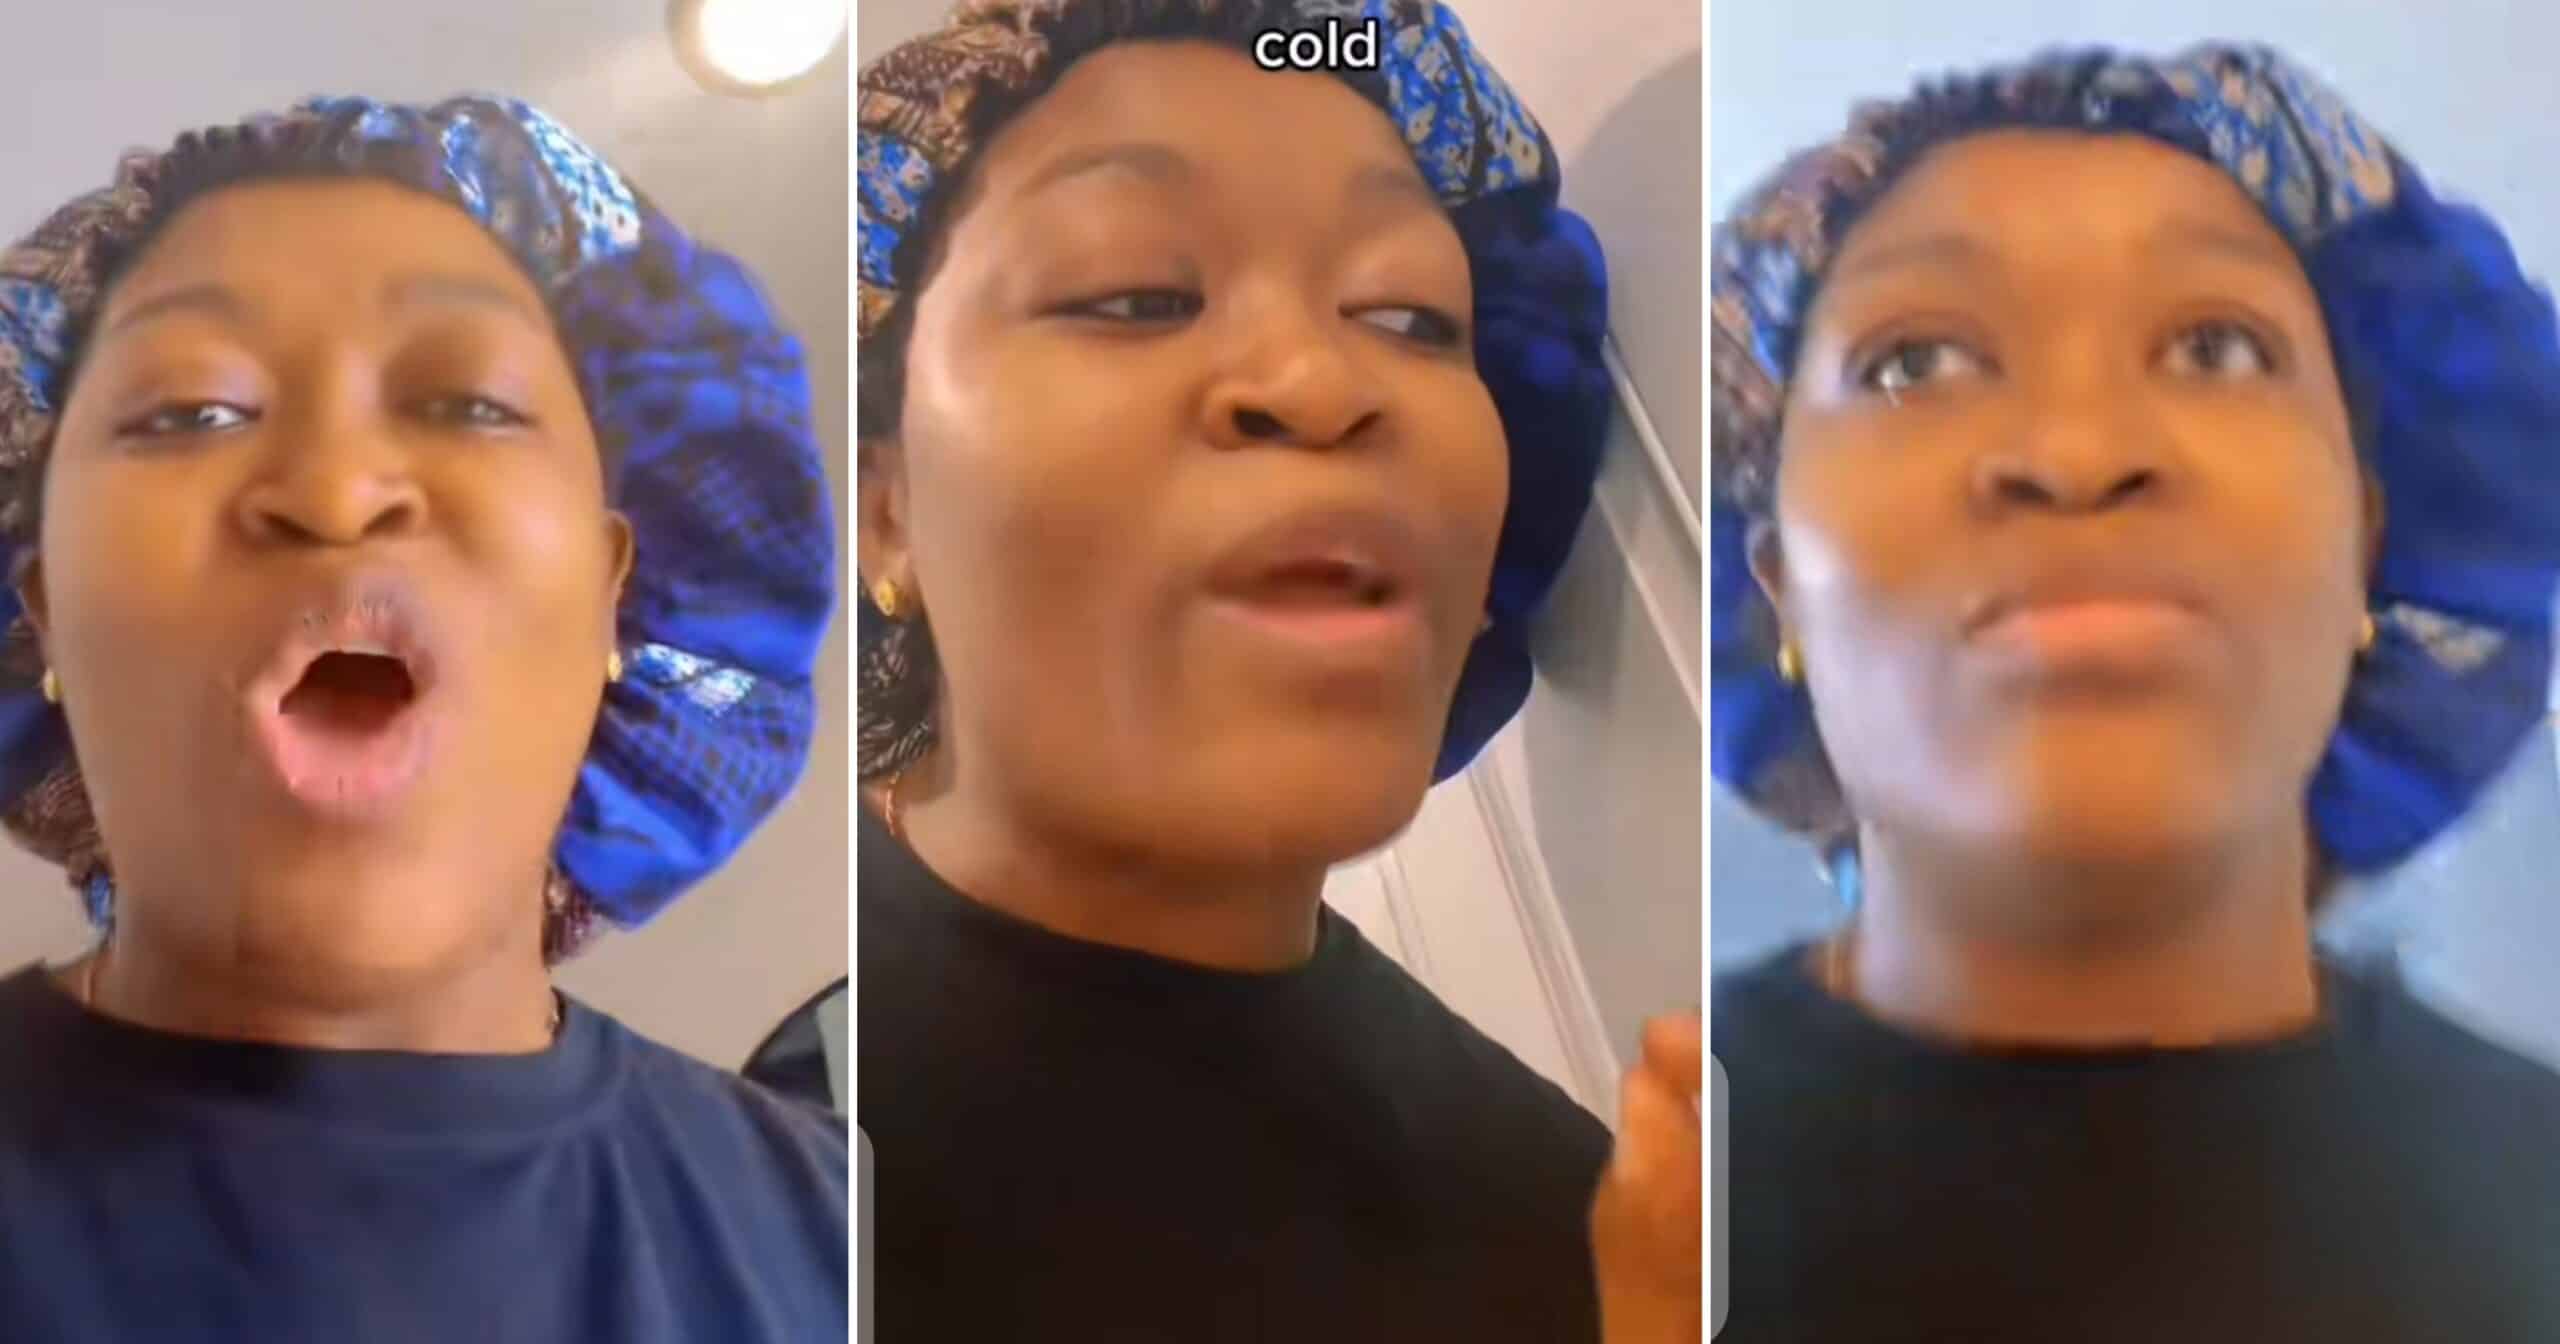 Hairdresser locks customer out in the cold for arriving 2 hours late